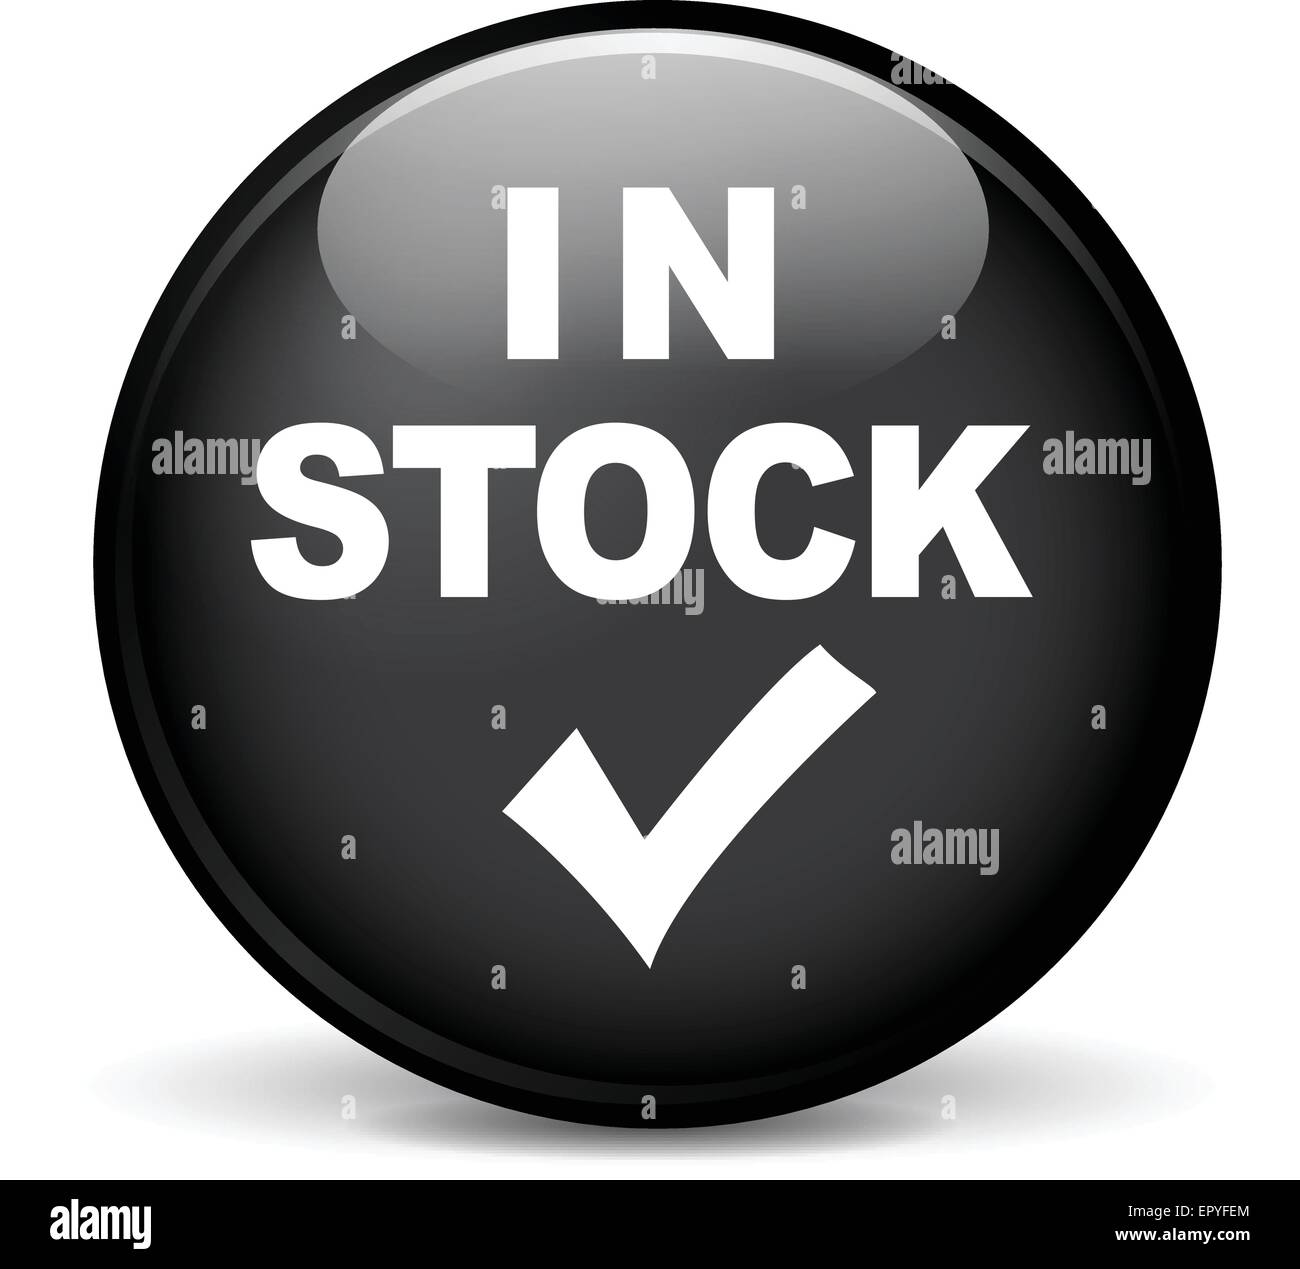 Commodity Stock Vector Images - Alamy